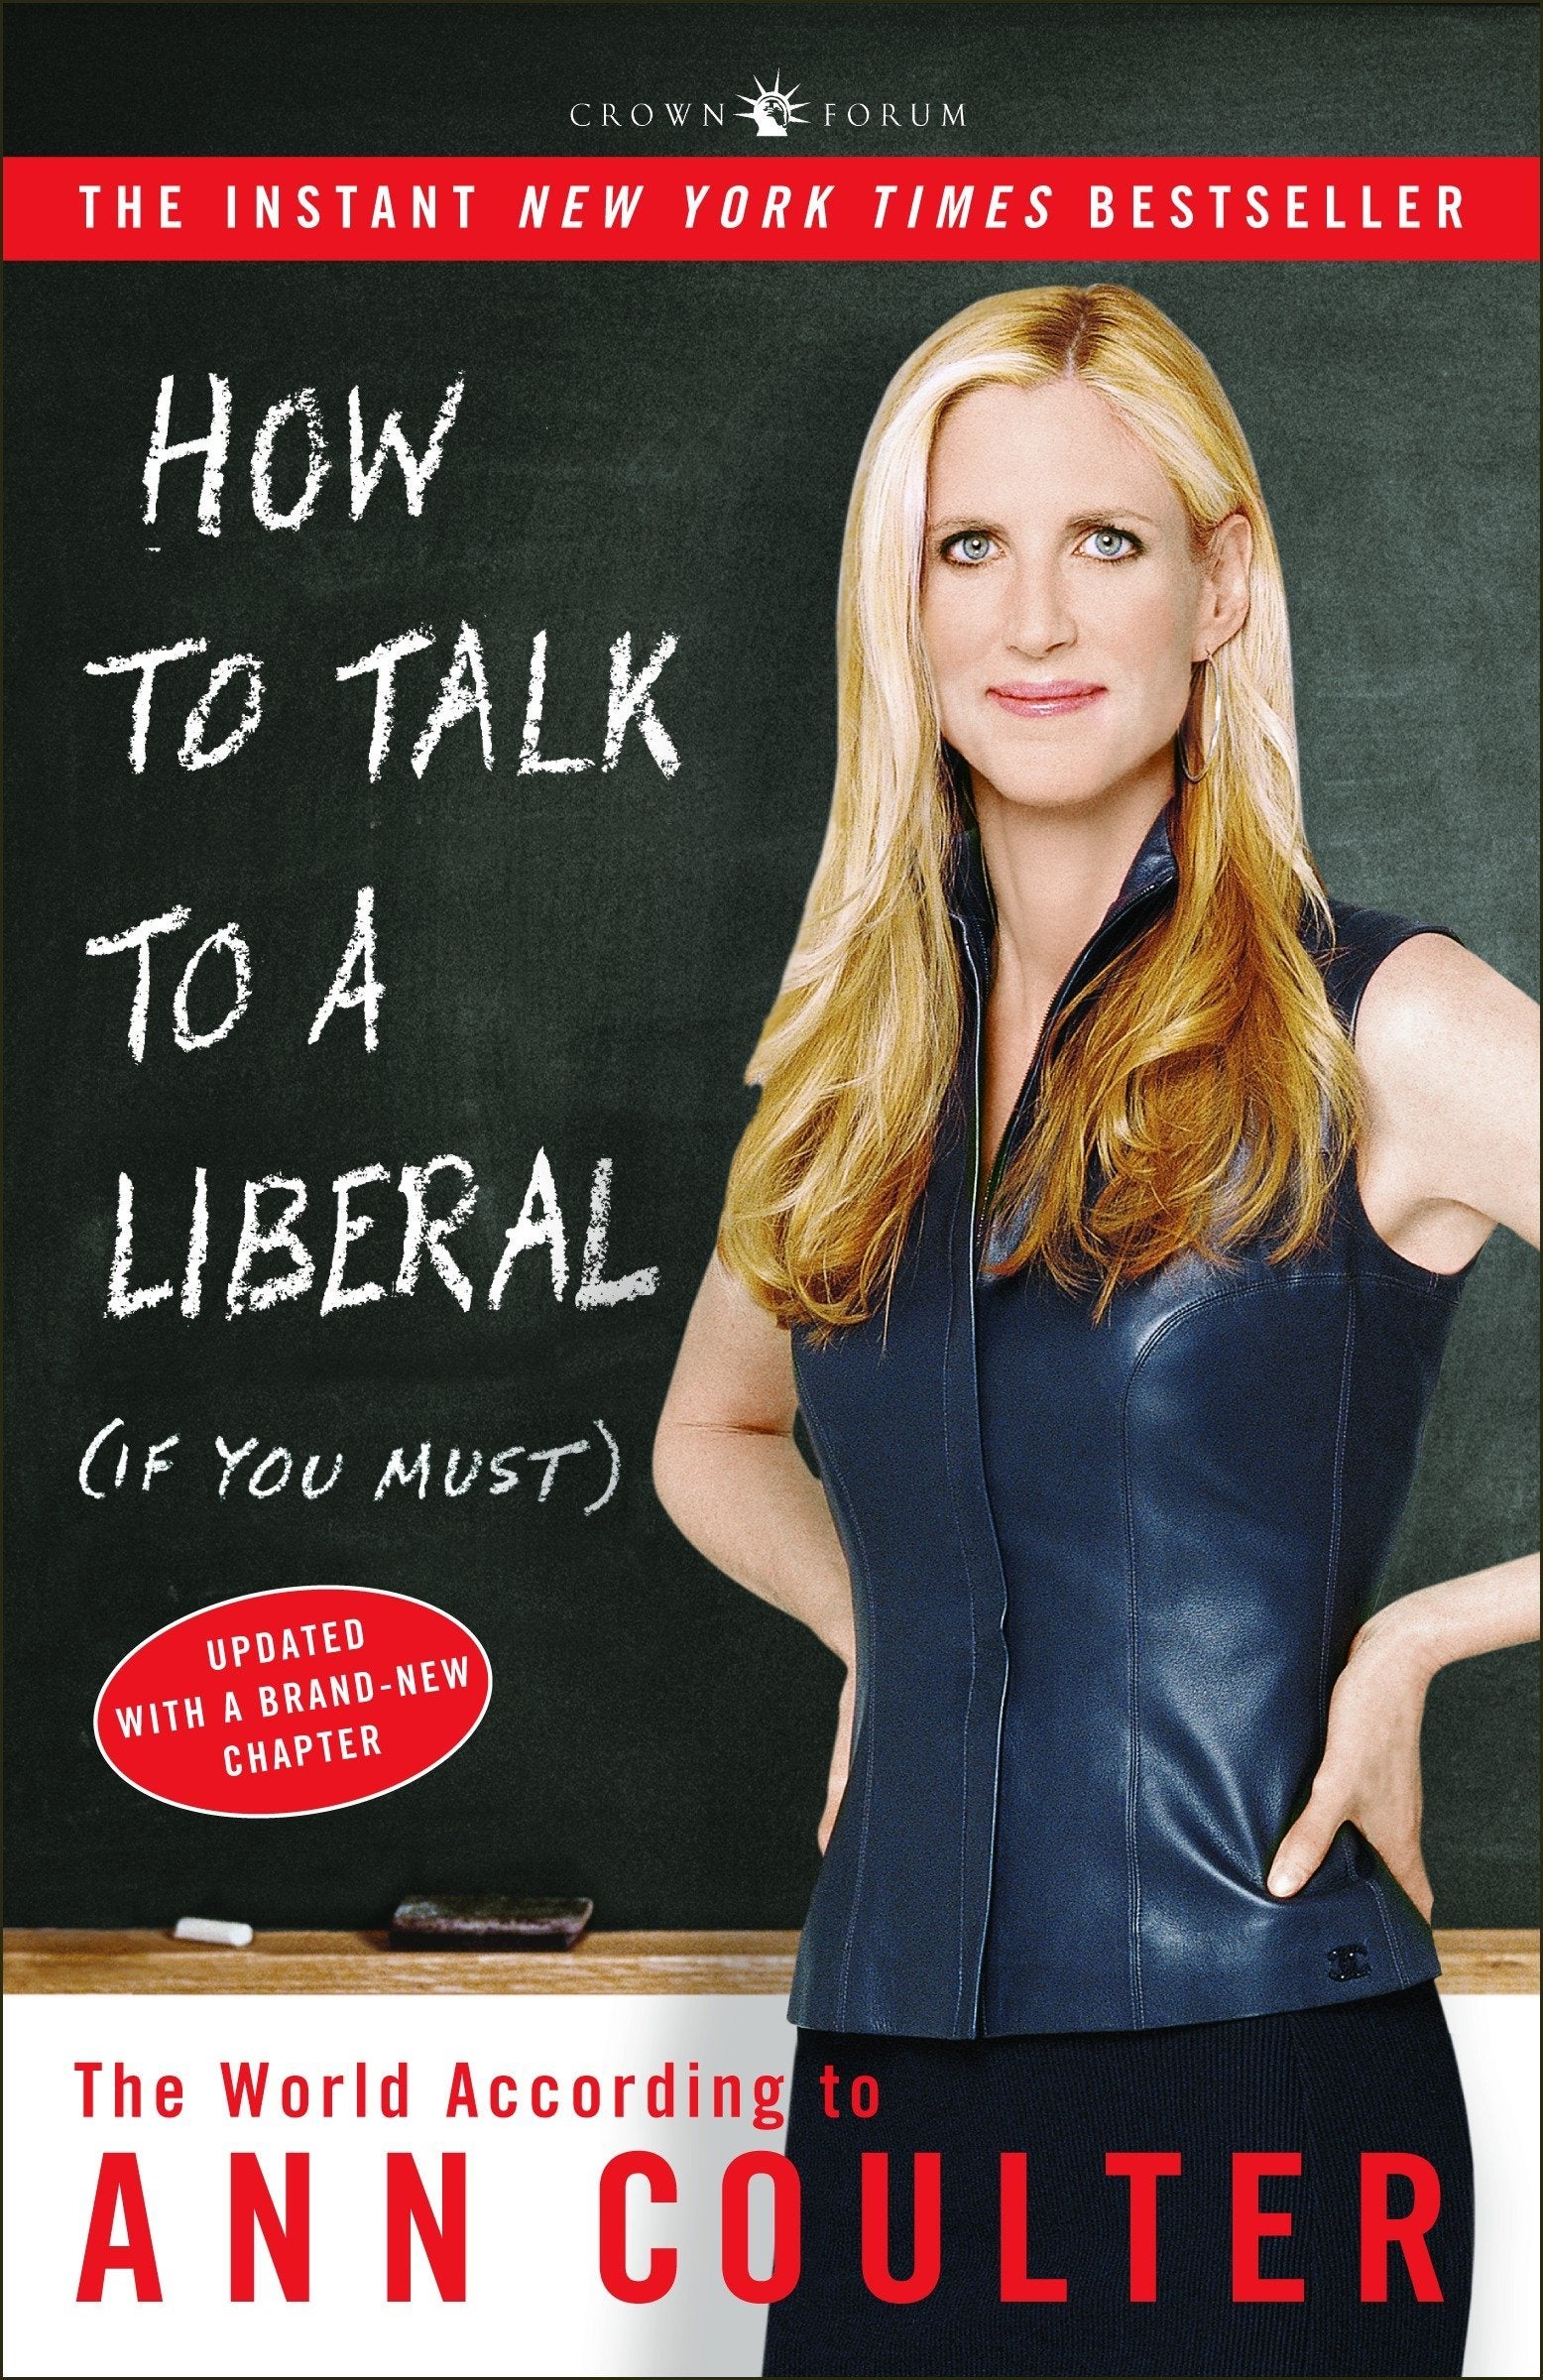 how to talk to a liberal(if you must) book cover